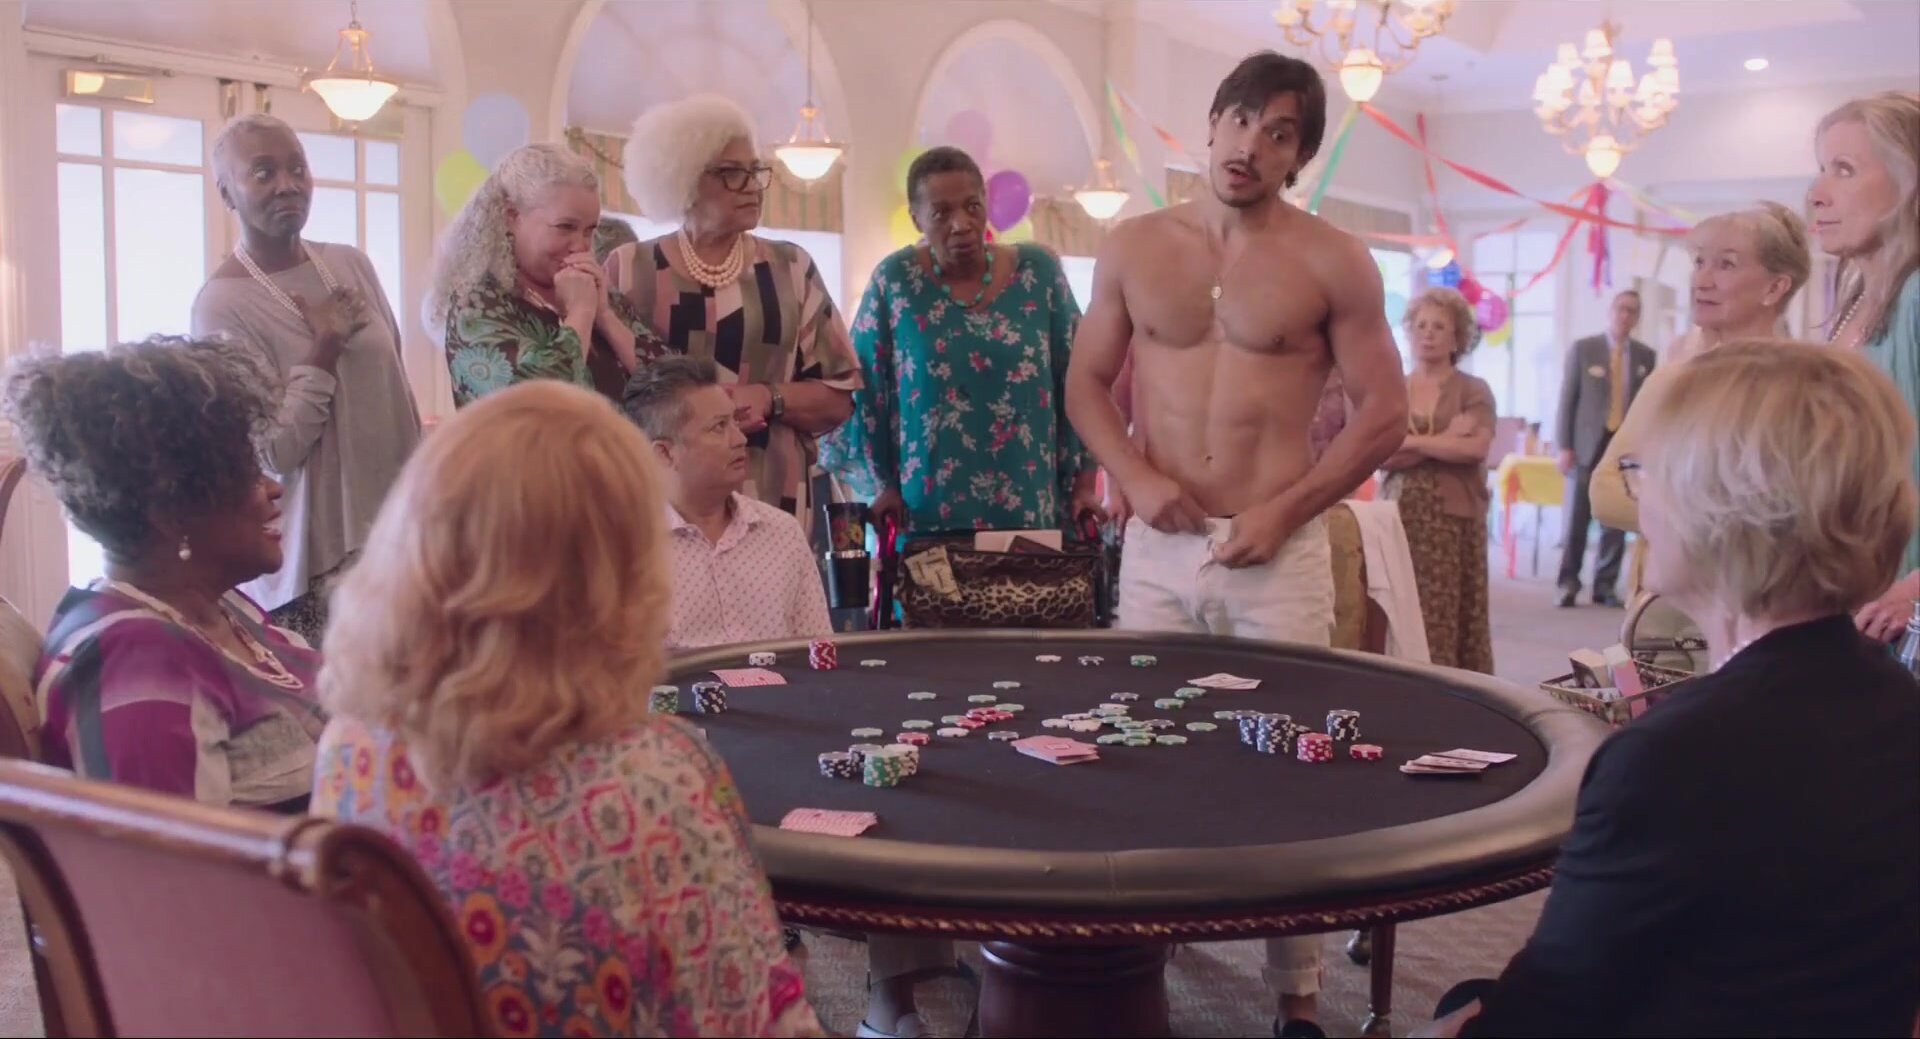 Fitness instructor loses at strip poker